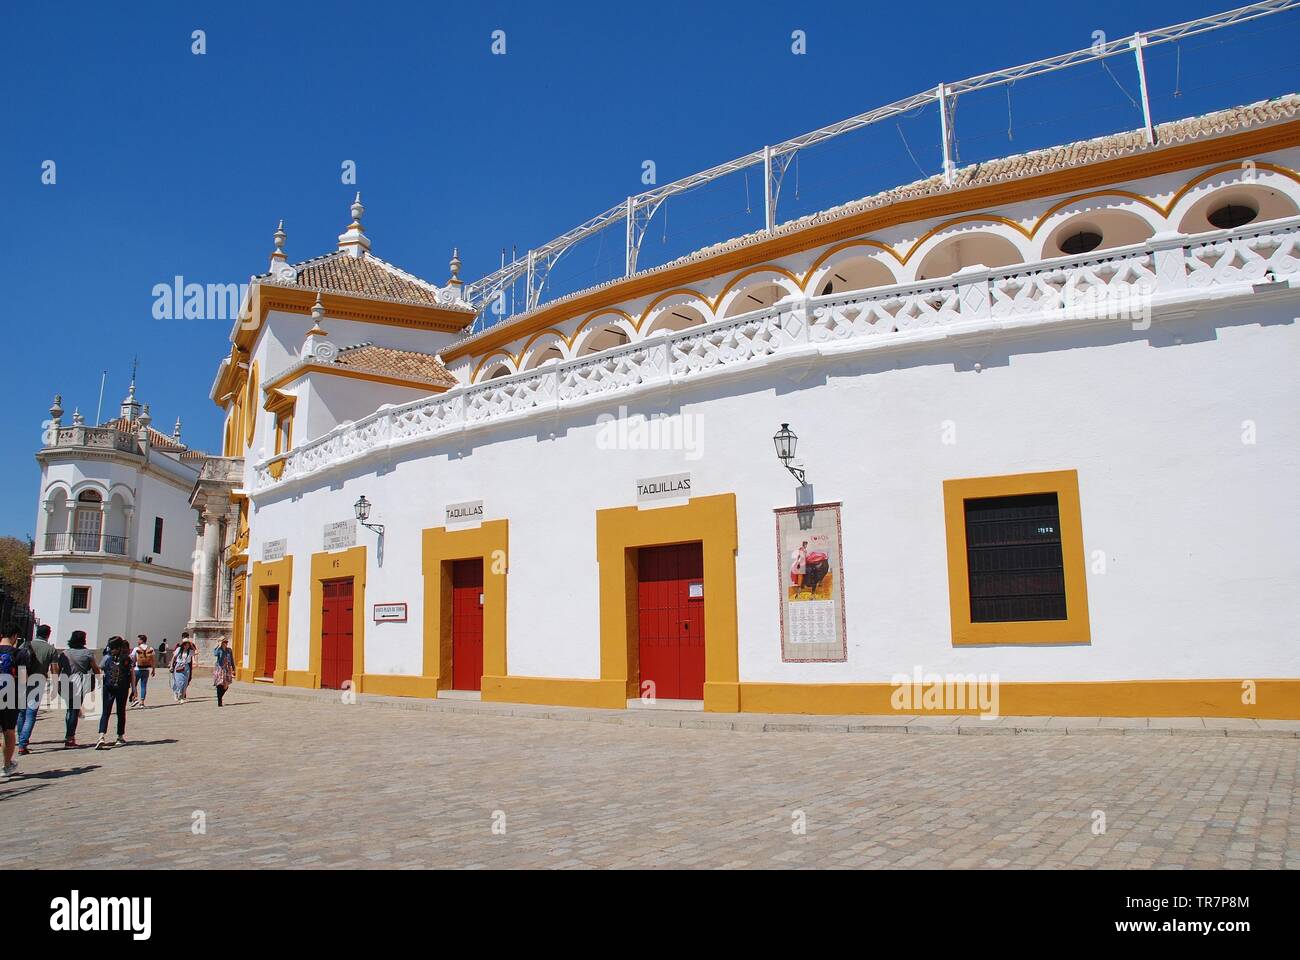 The Plaza de Toros de la Real Maestranza in Seville, Spain on April 3, 2019. The bullfighting ring has a capacity of twelve thousand people. Stock Photo